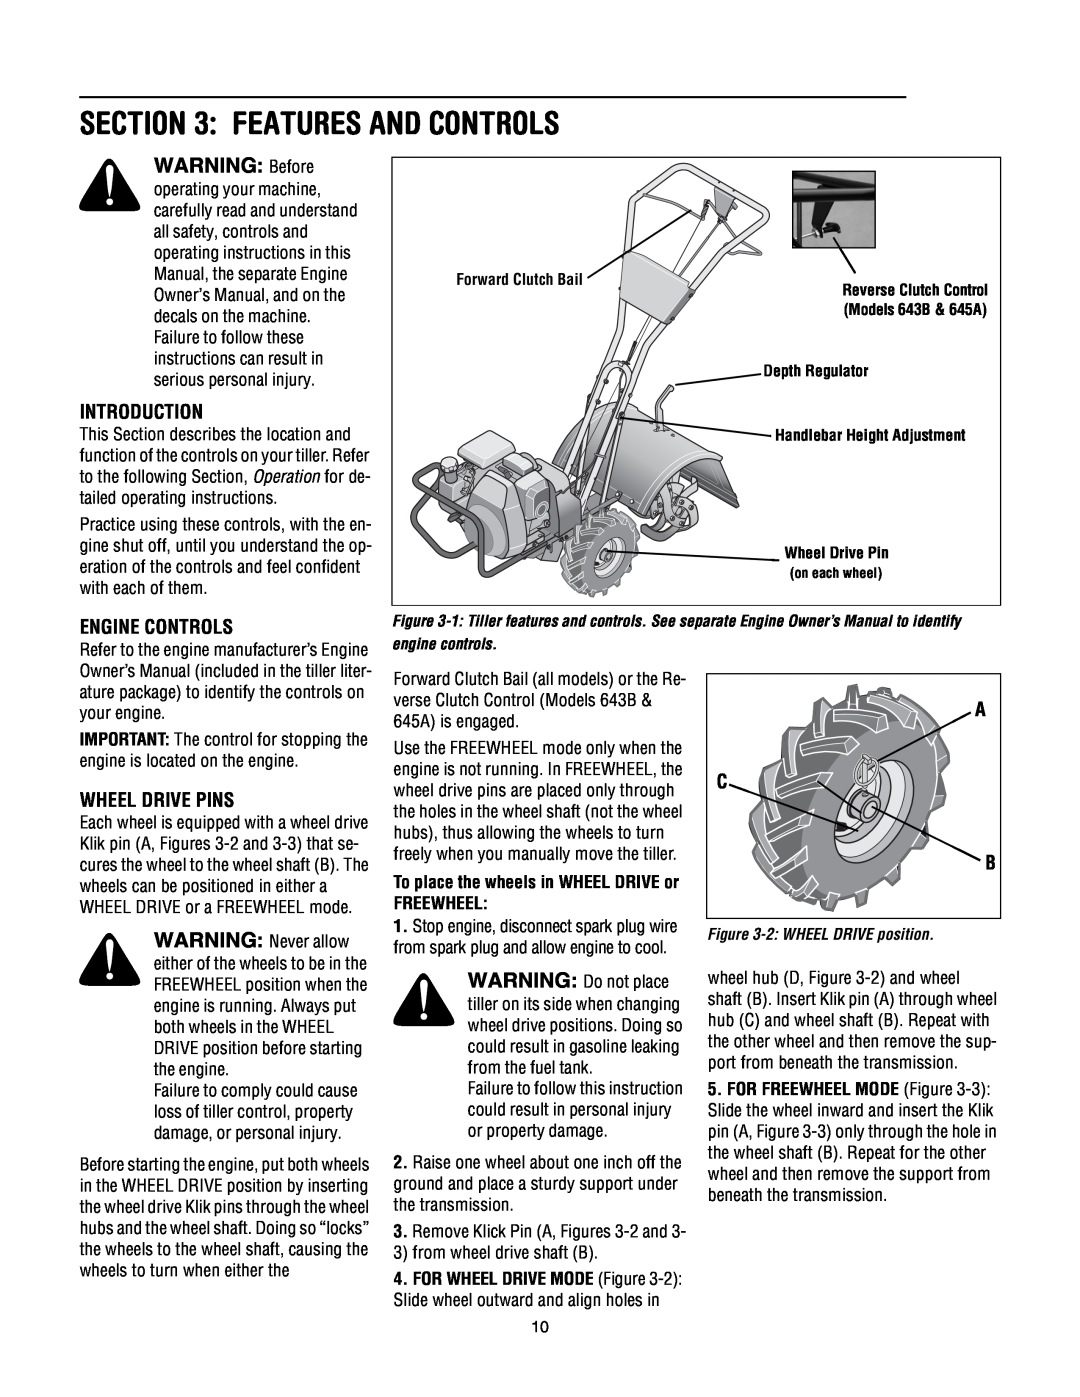 Troy-Bilt 645A Super Bronco manual Features And Controls, WARNING Before, Introduction, Engine Controls, Wheel Drive Pins 